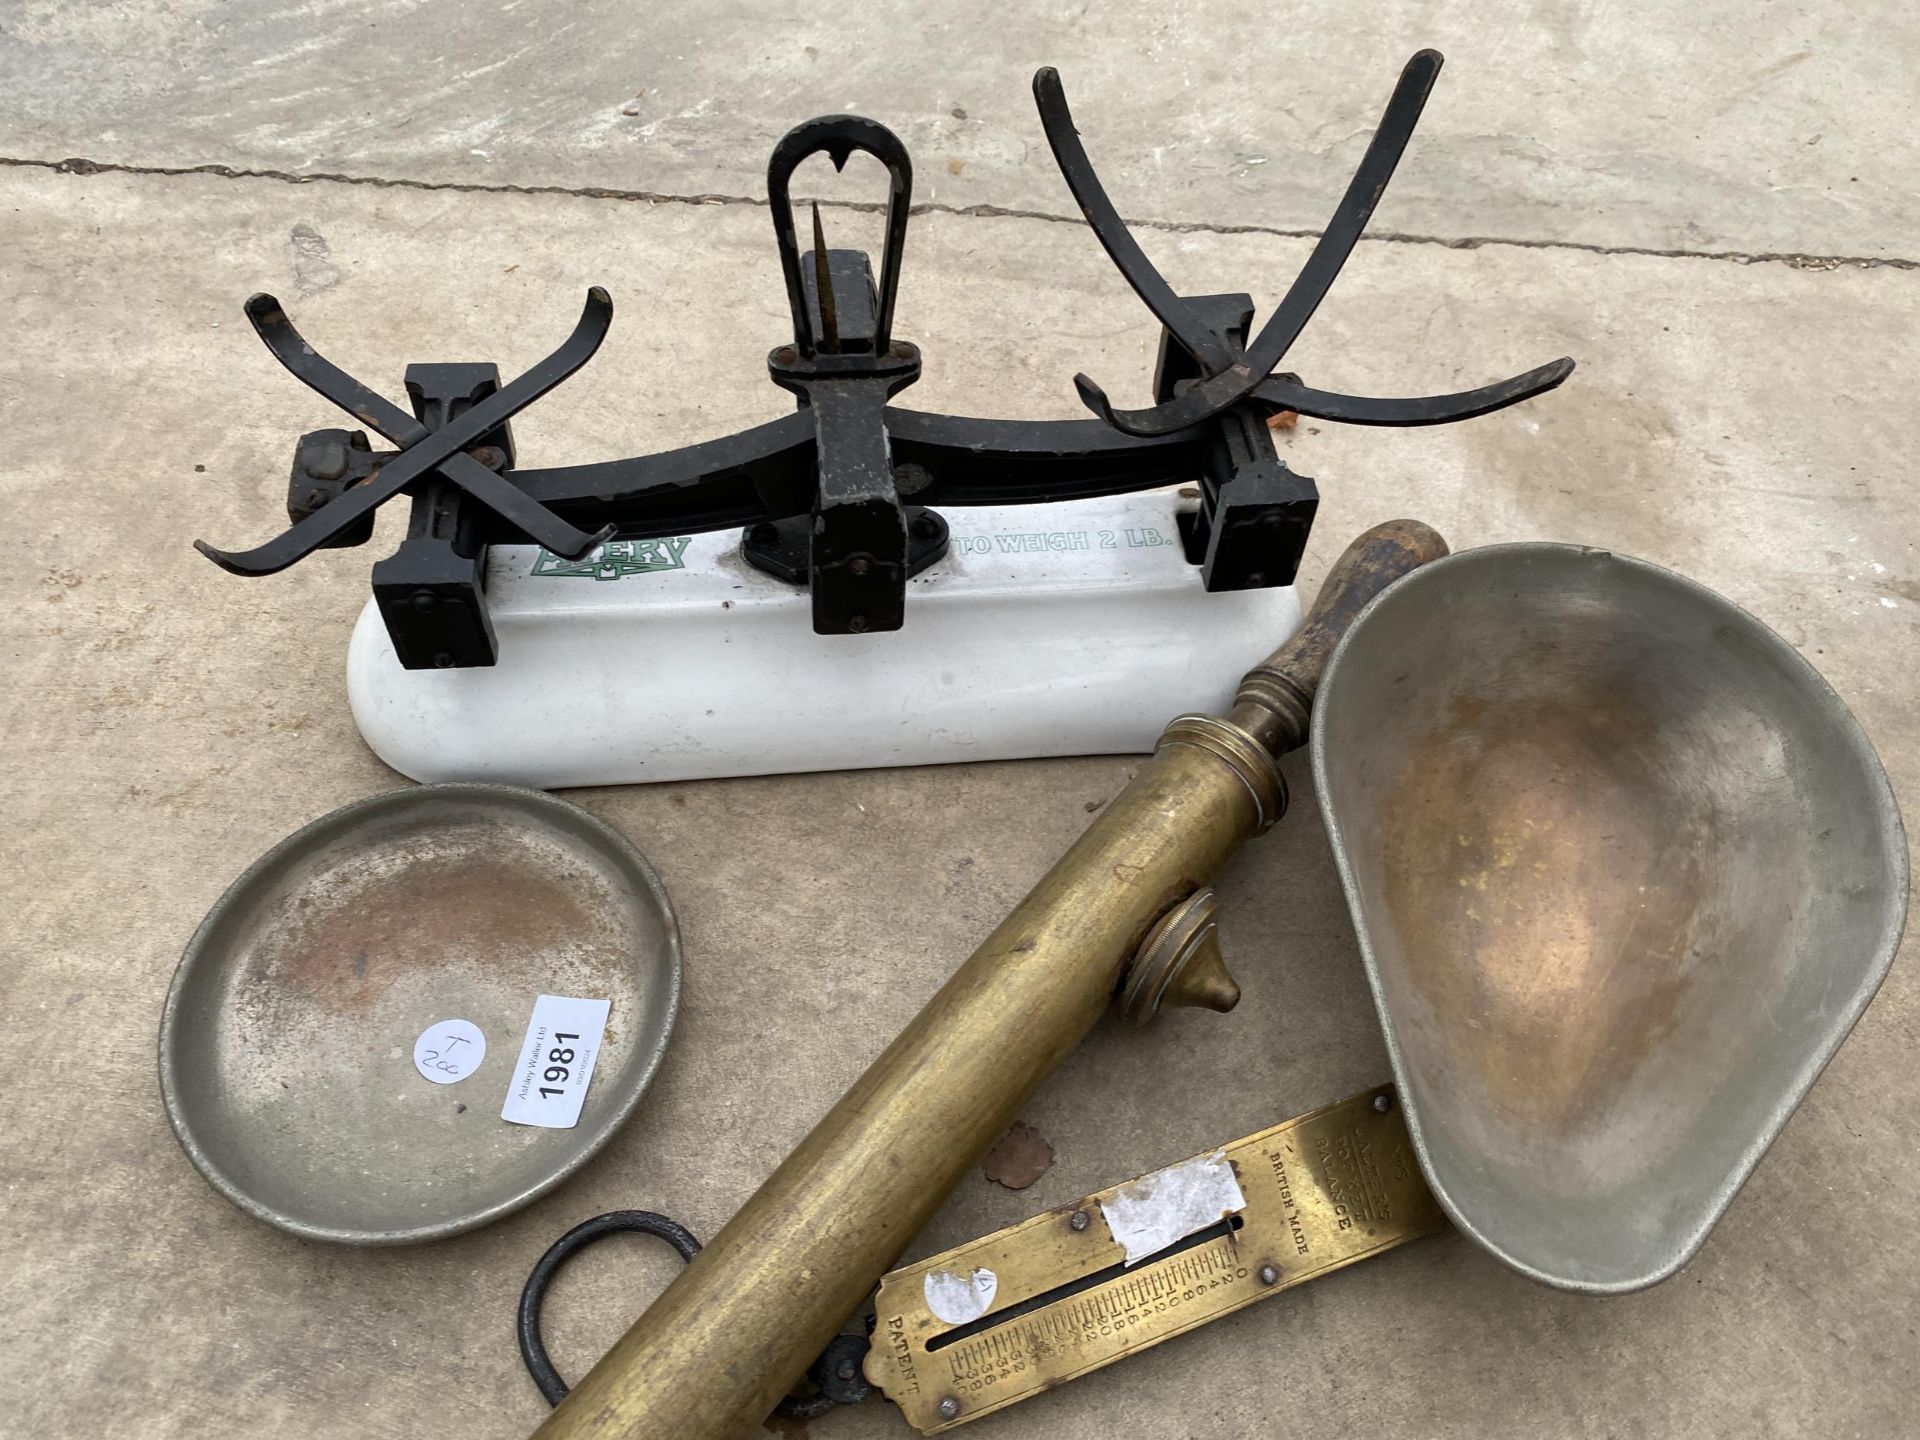 A SET OF BALANCE SCALES, A SMALL SET OF BRASS SCALES AND A VINTAGE BRASS GARDEN SPRAYER - Image 4 of 4